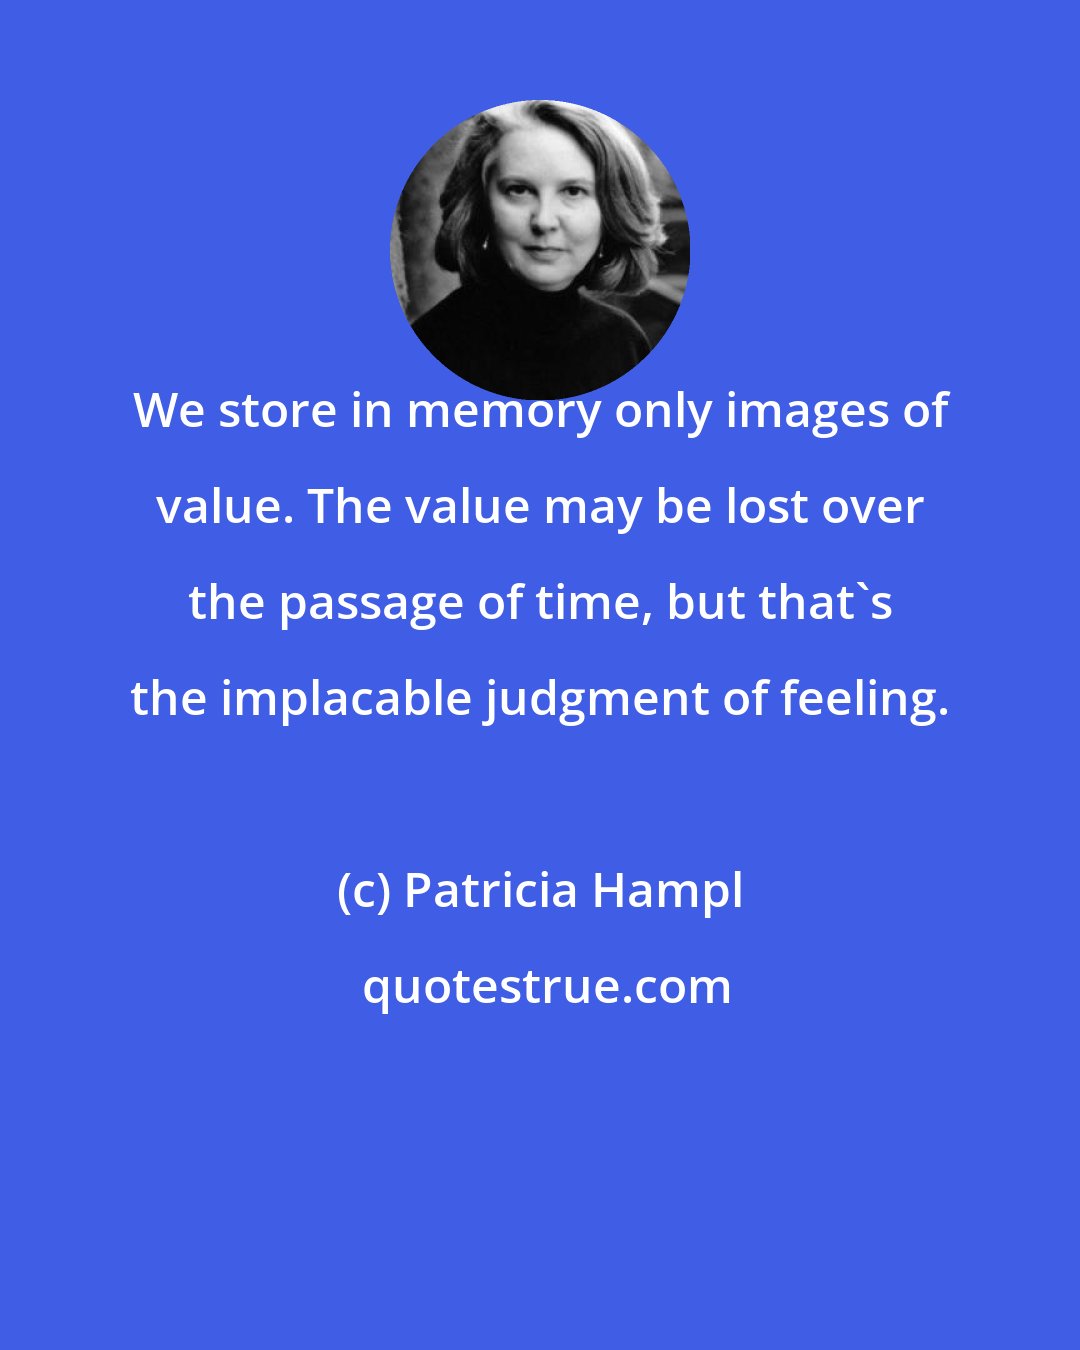 Patricia Hampl: We store in memory only images of value. The value may be lost over the passage of time, but that's the implacable judgment of feeling.